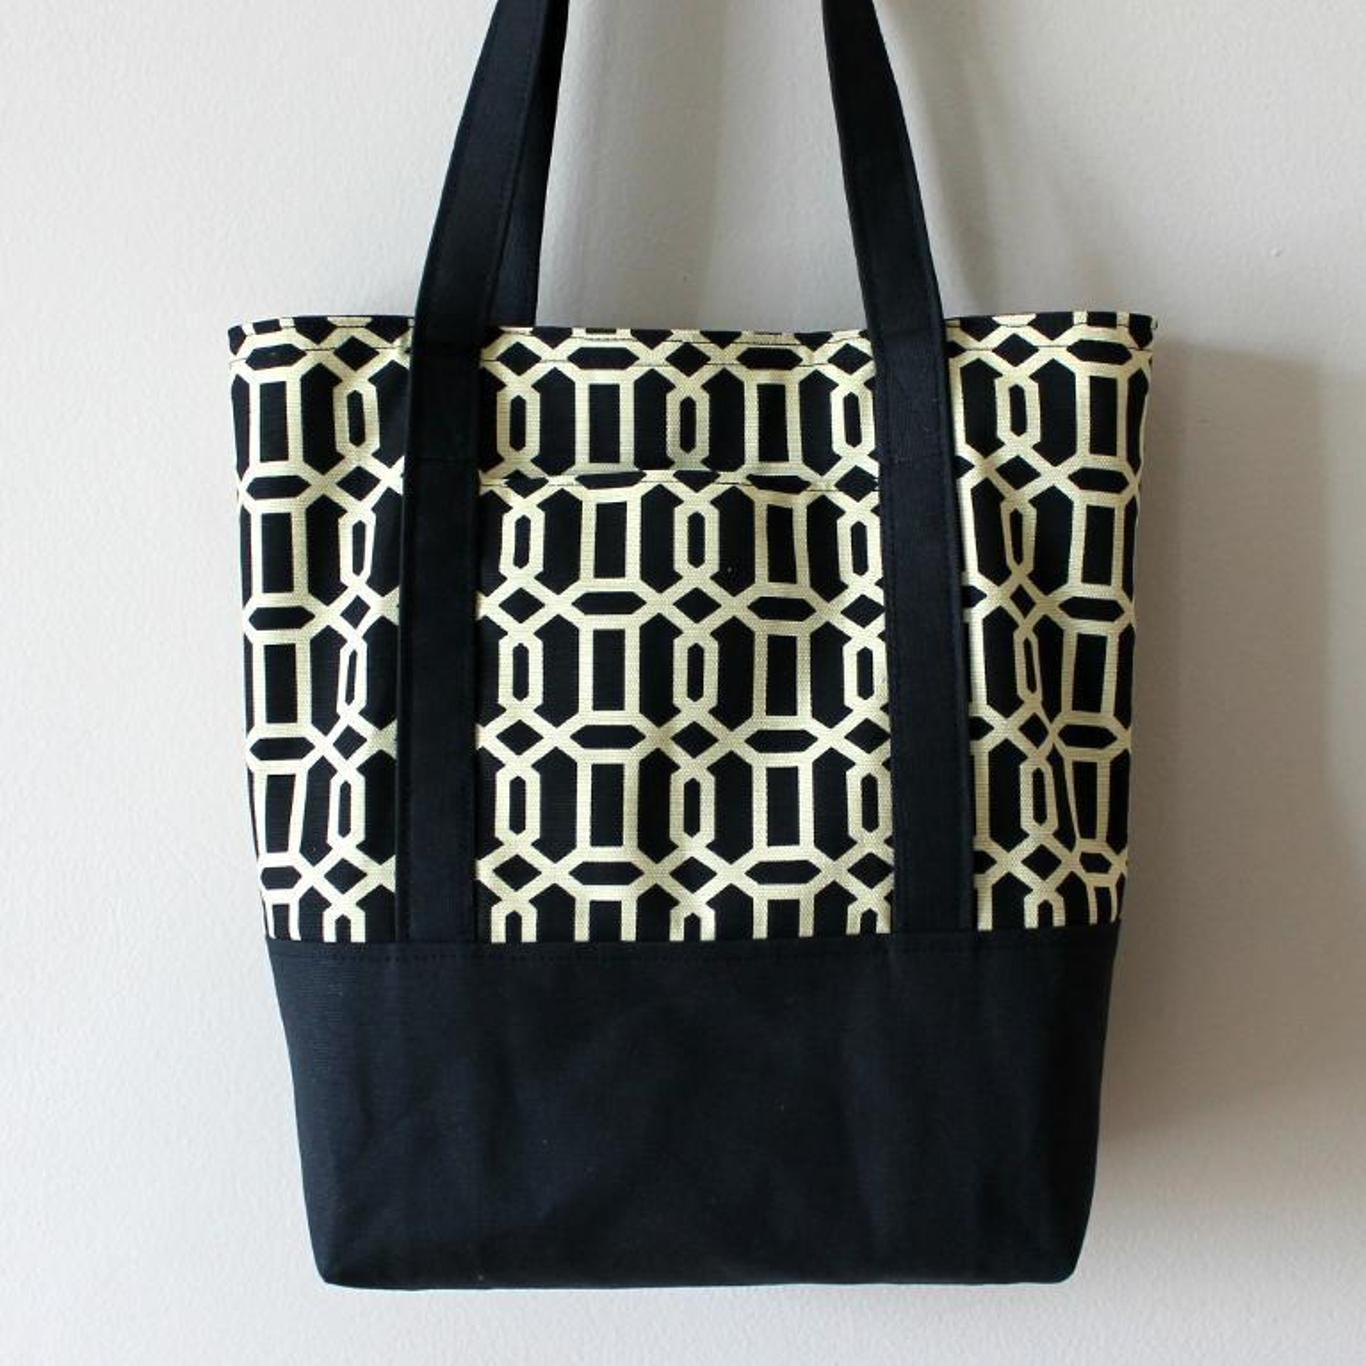 Sewing Grocery Tote Bags Free Patterns | The Art of Mike Mignola